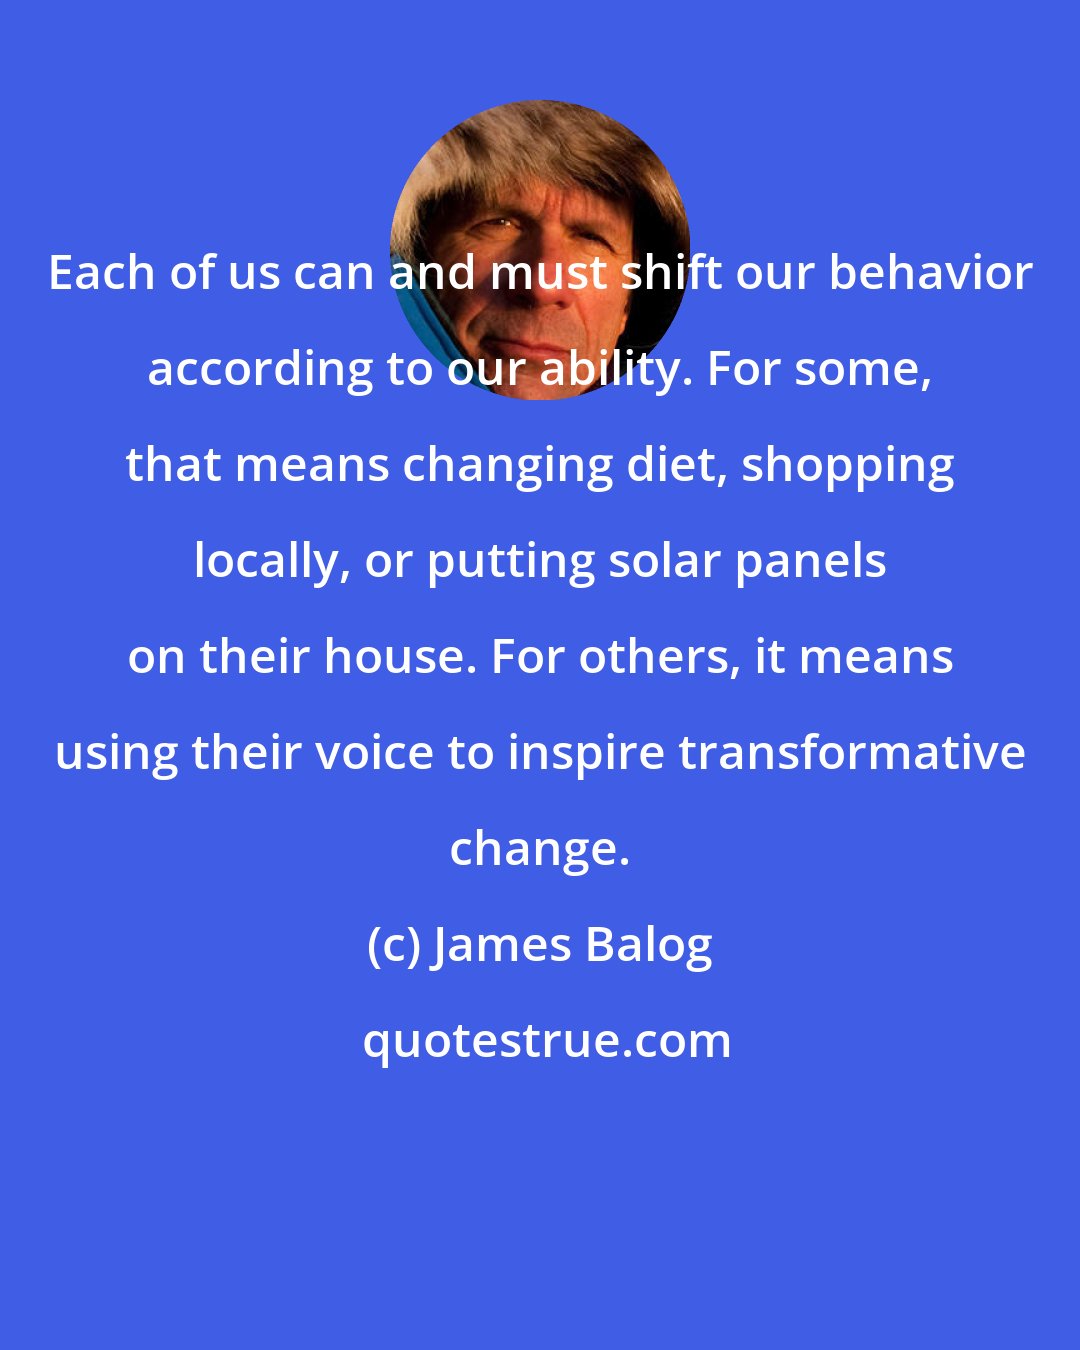 James Balog: Each of us can and must shift our behavior according to our ability. For some, that means changing diet, shopping locally, or putting solar panels on their house. For others, it means using their voice to inspire transformative change.